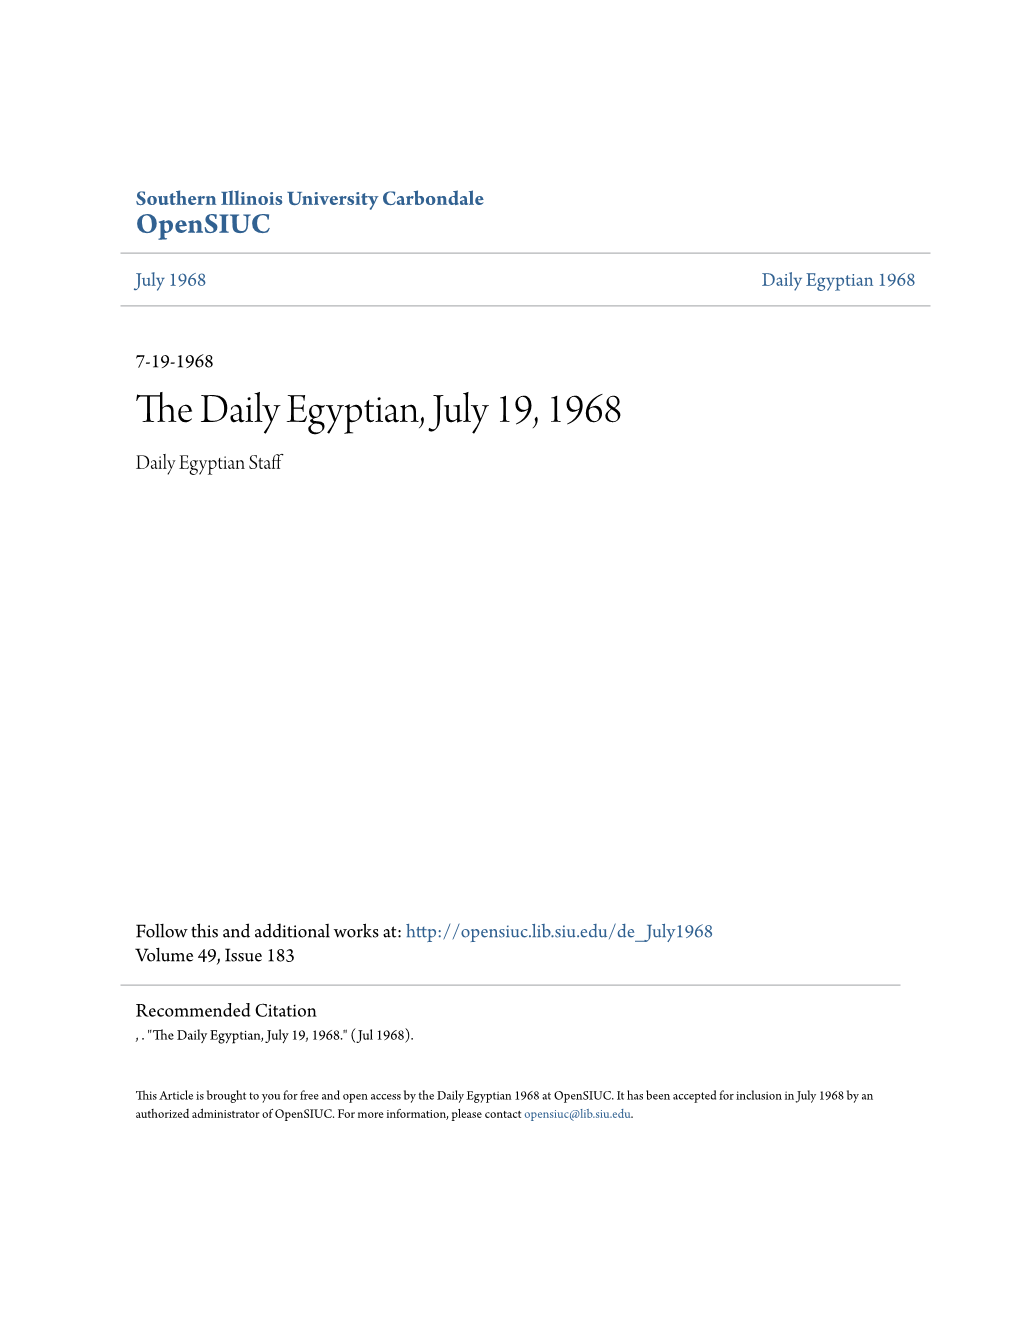 The Daily Egyptian, July 19, 1968